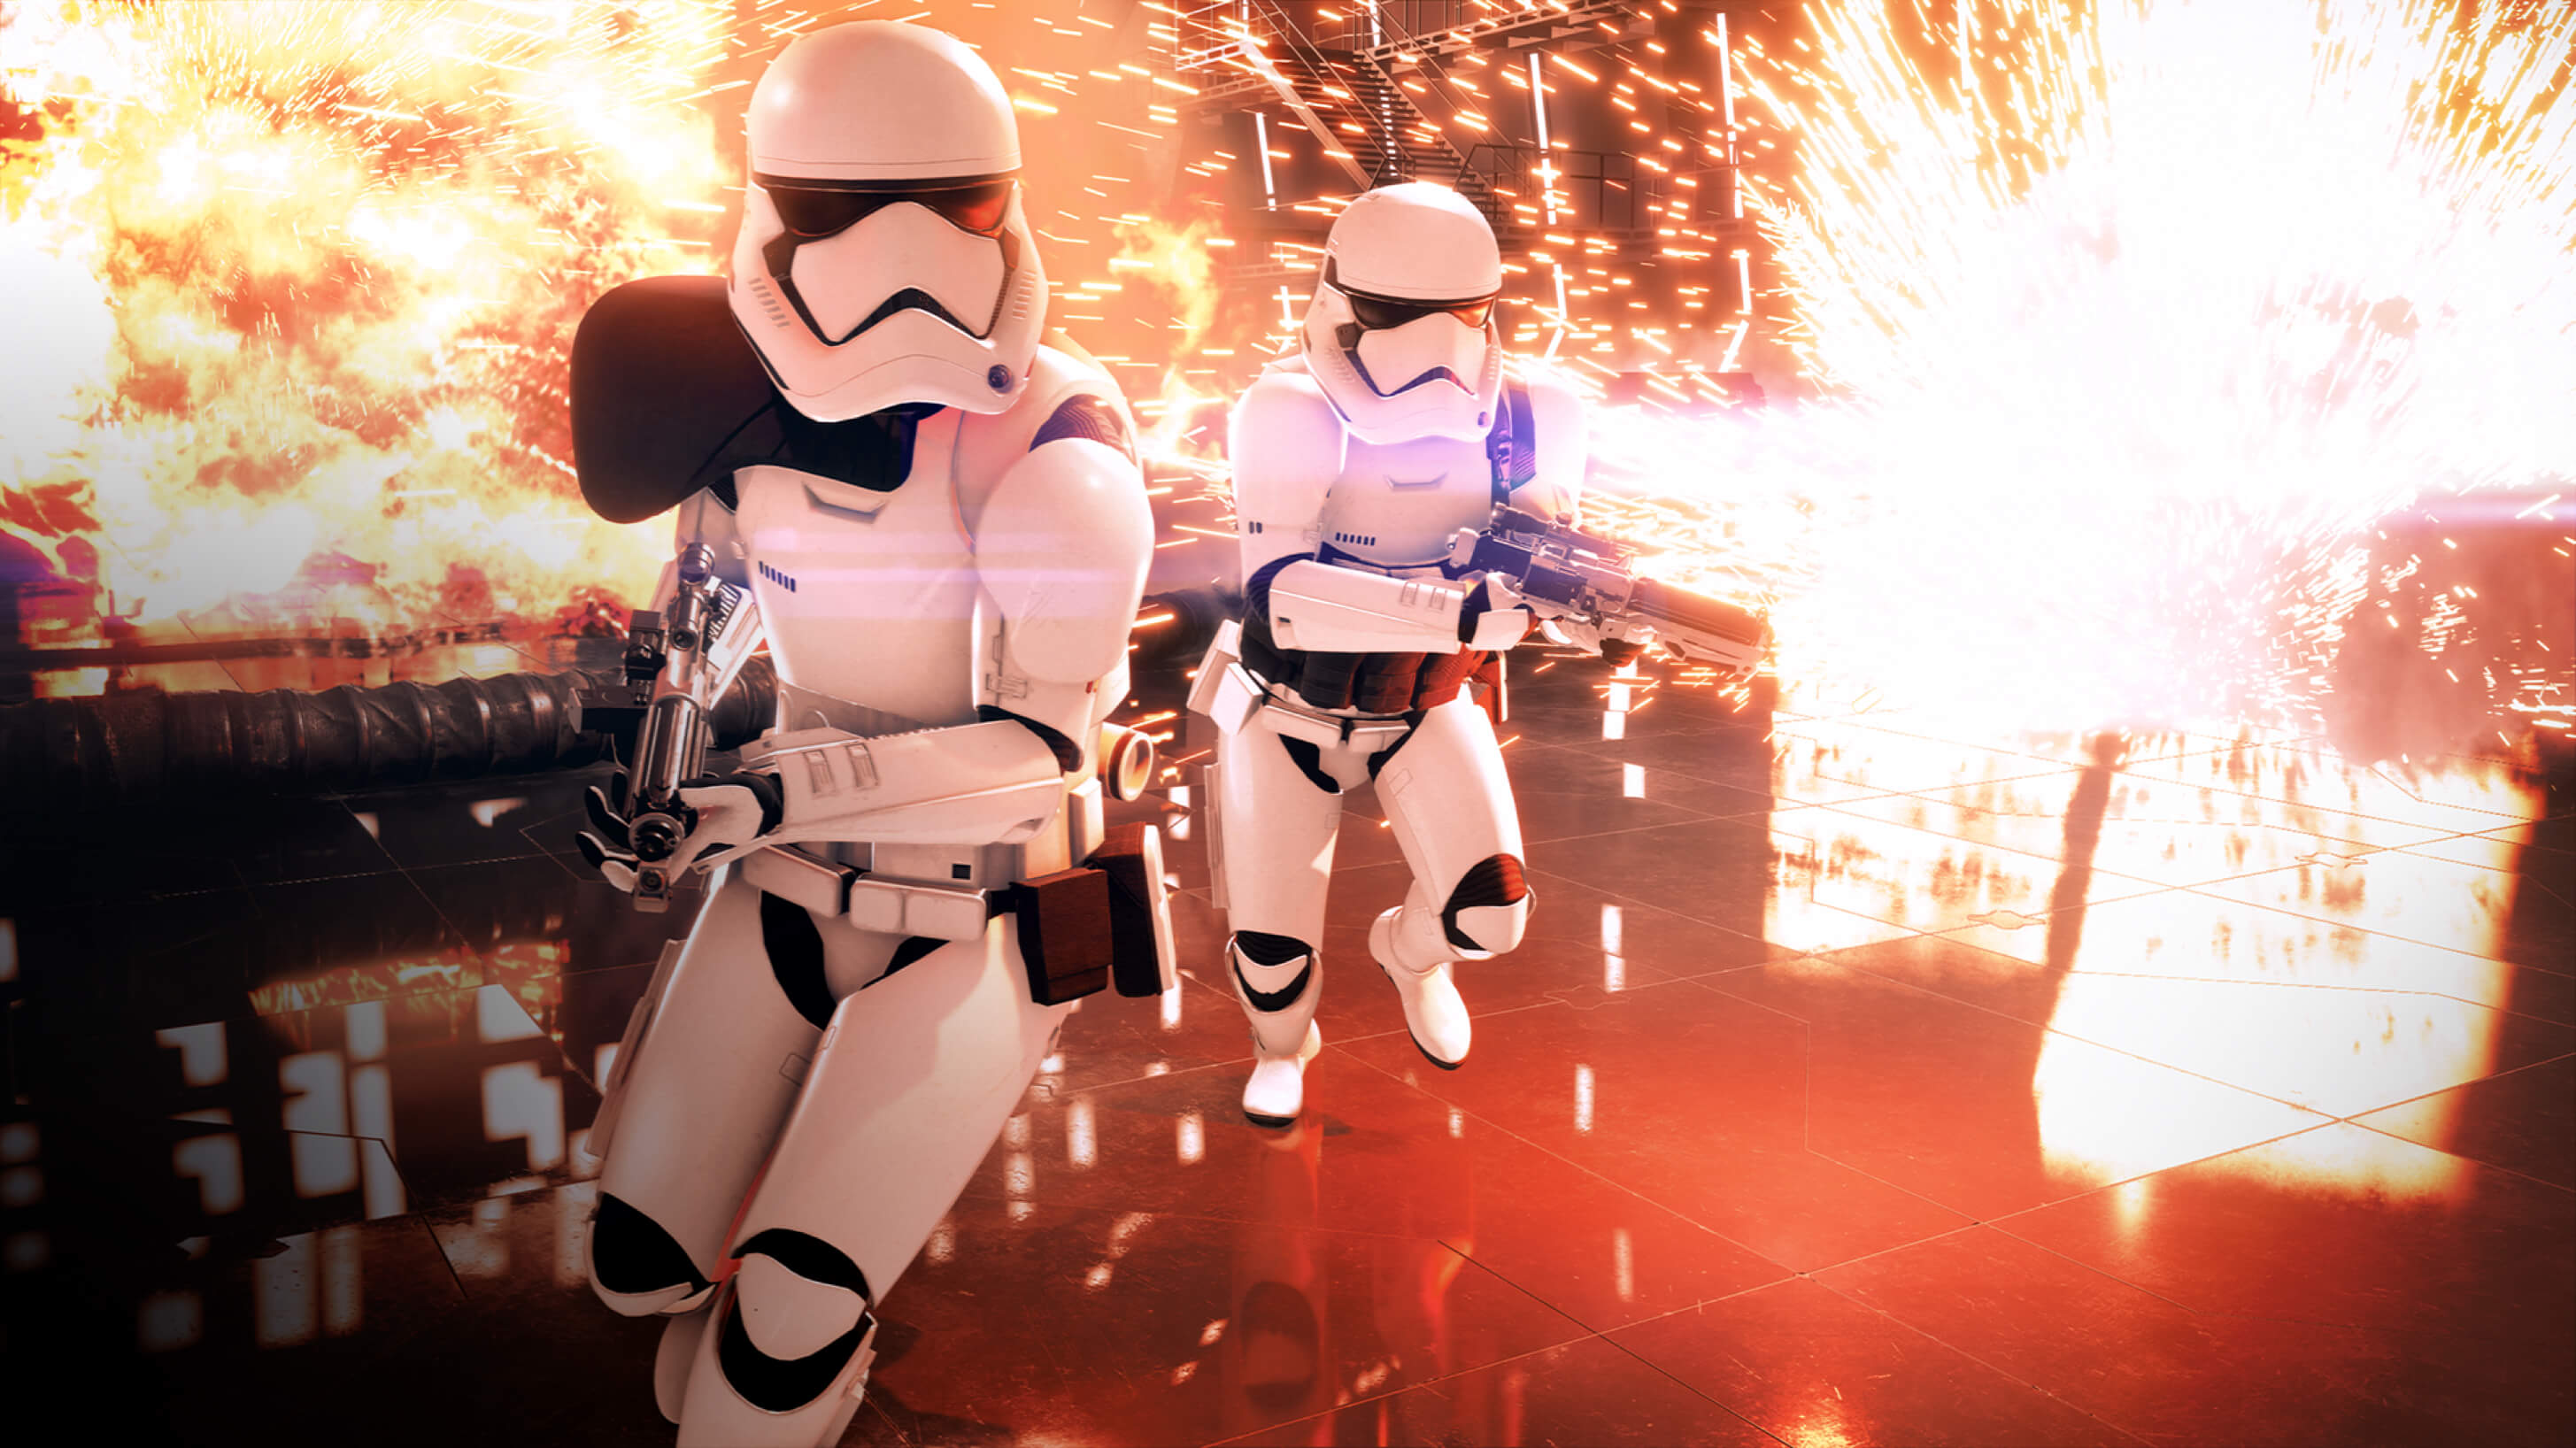 Image for This week's best gaming deals: Star Wars Battlefront 2, £10 off New Nintendo 2DS XL, and more